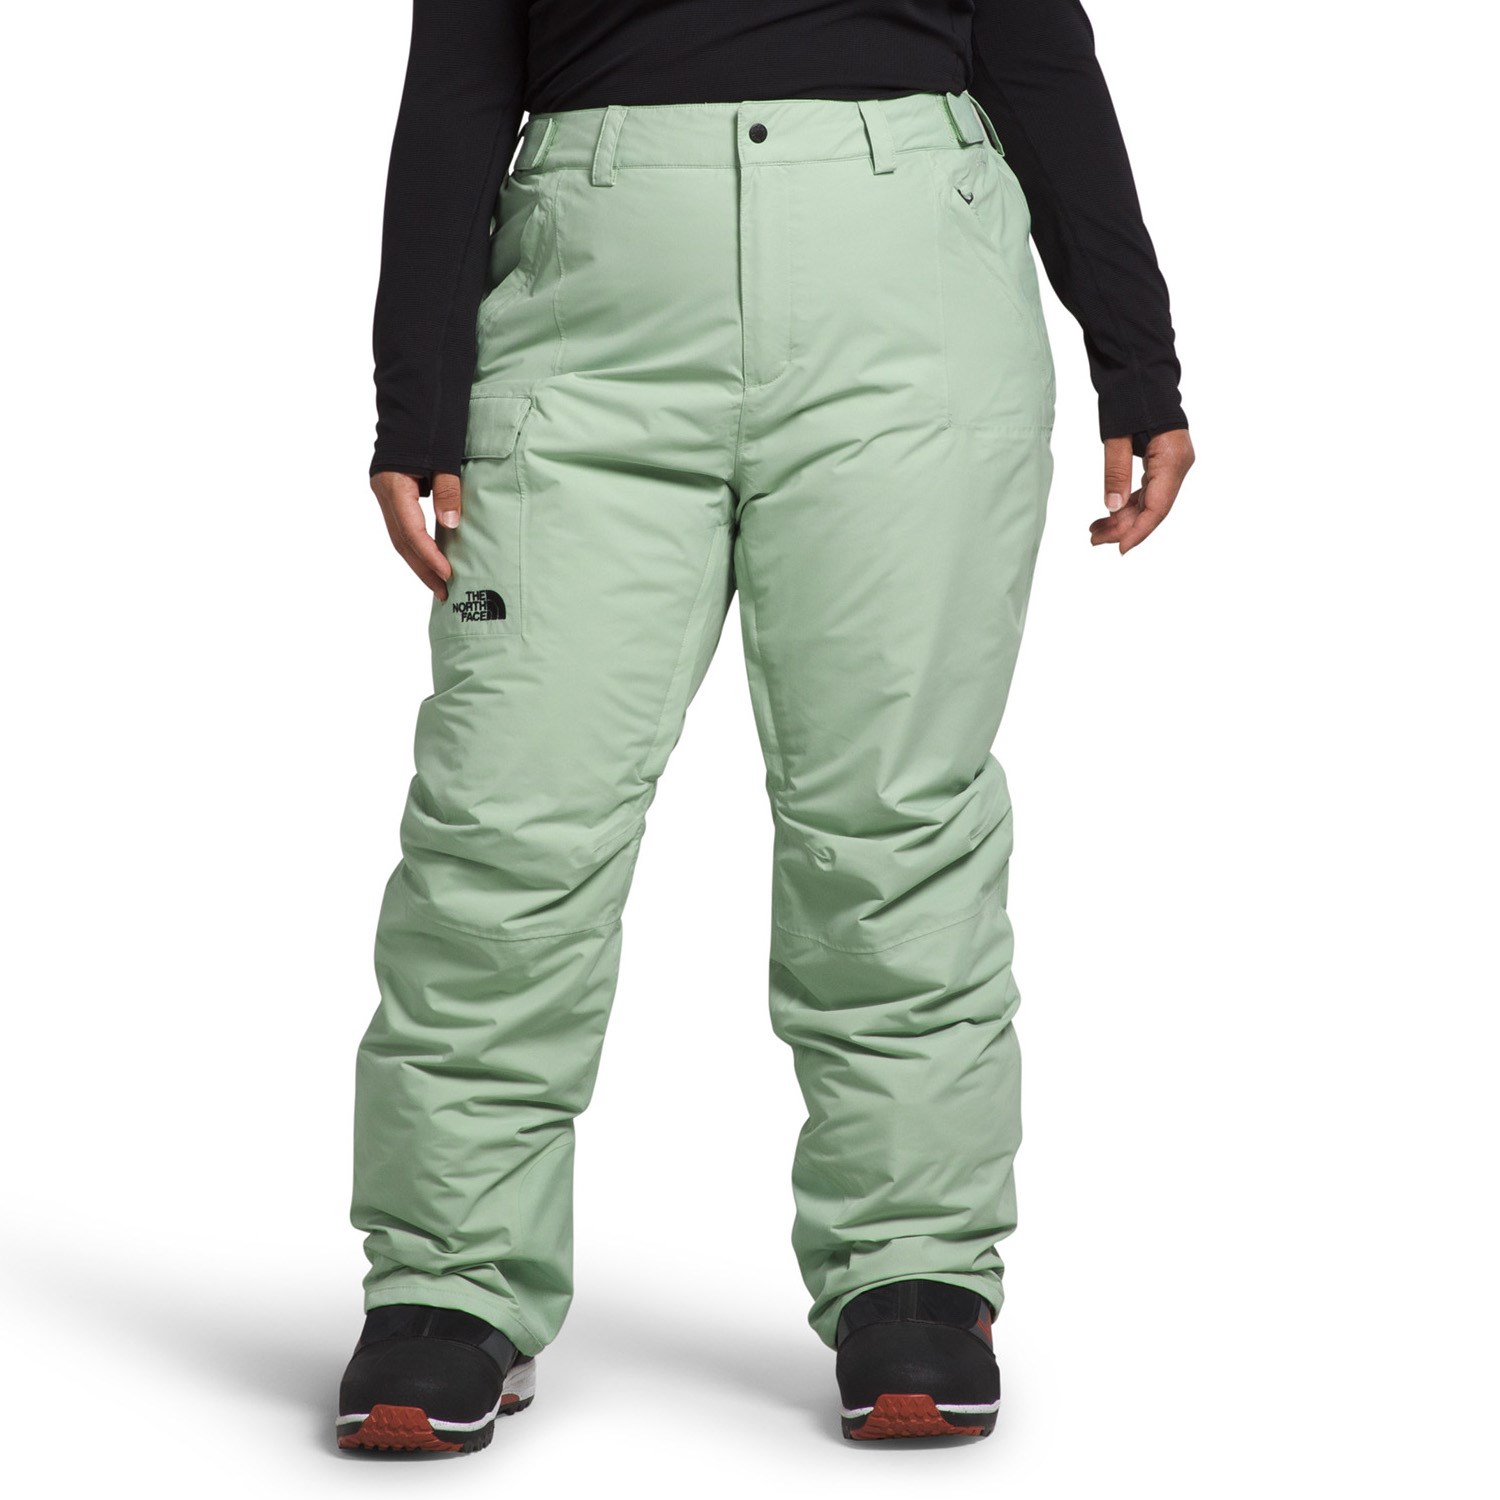 Брюки The North Face Freedom Insulated Plus, цвет Misty Sage брюки the north face freedom insulated plus short цвет boysenberry